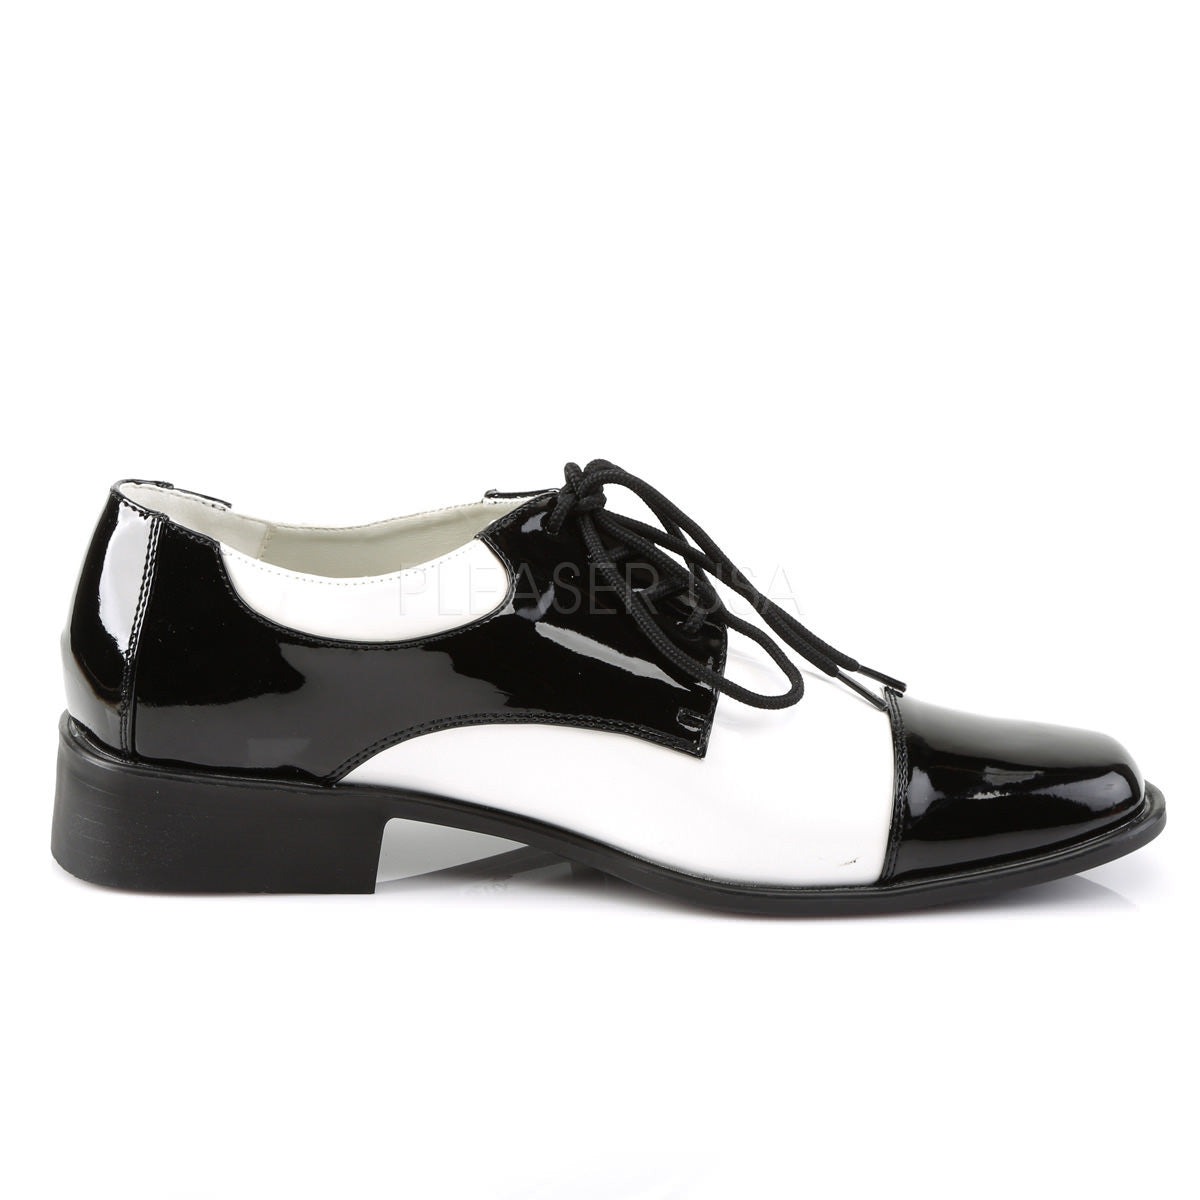 Men's Black and White Disco Shoes